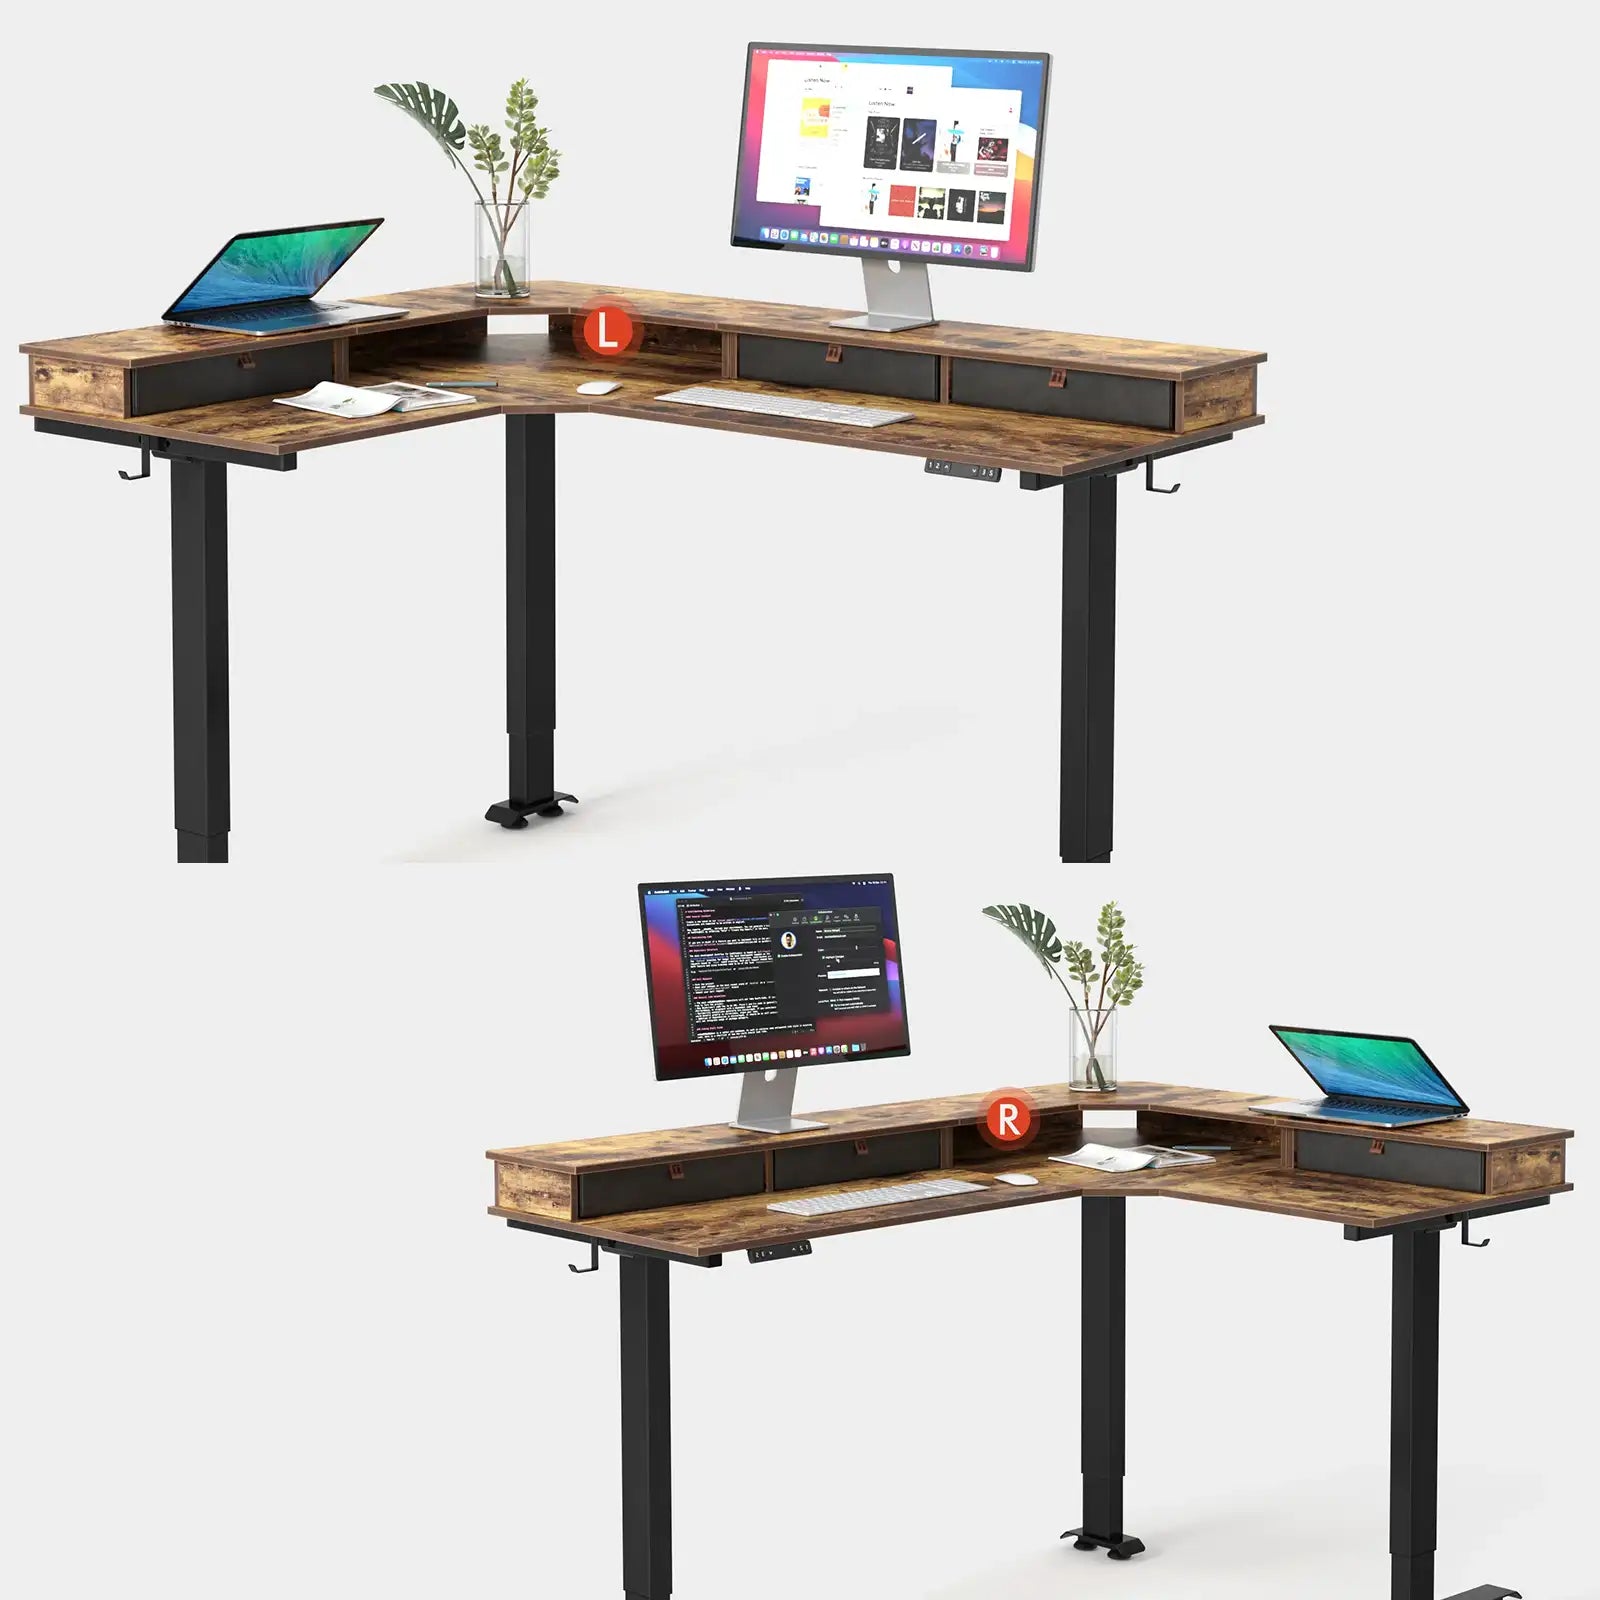 Triple Motor 75" L Shaped Standing Desk with 5 Drawers, Reversible Electric Standing Gaming Desk Adjustable Height, Corner Stand up Desk with Splice Board